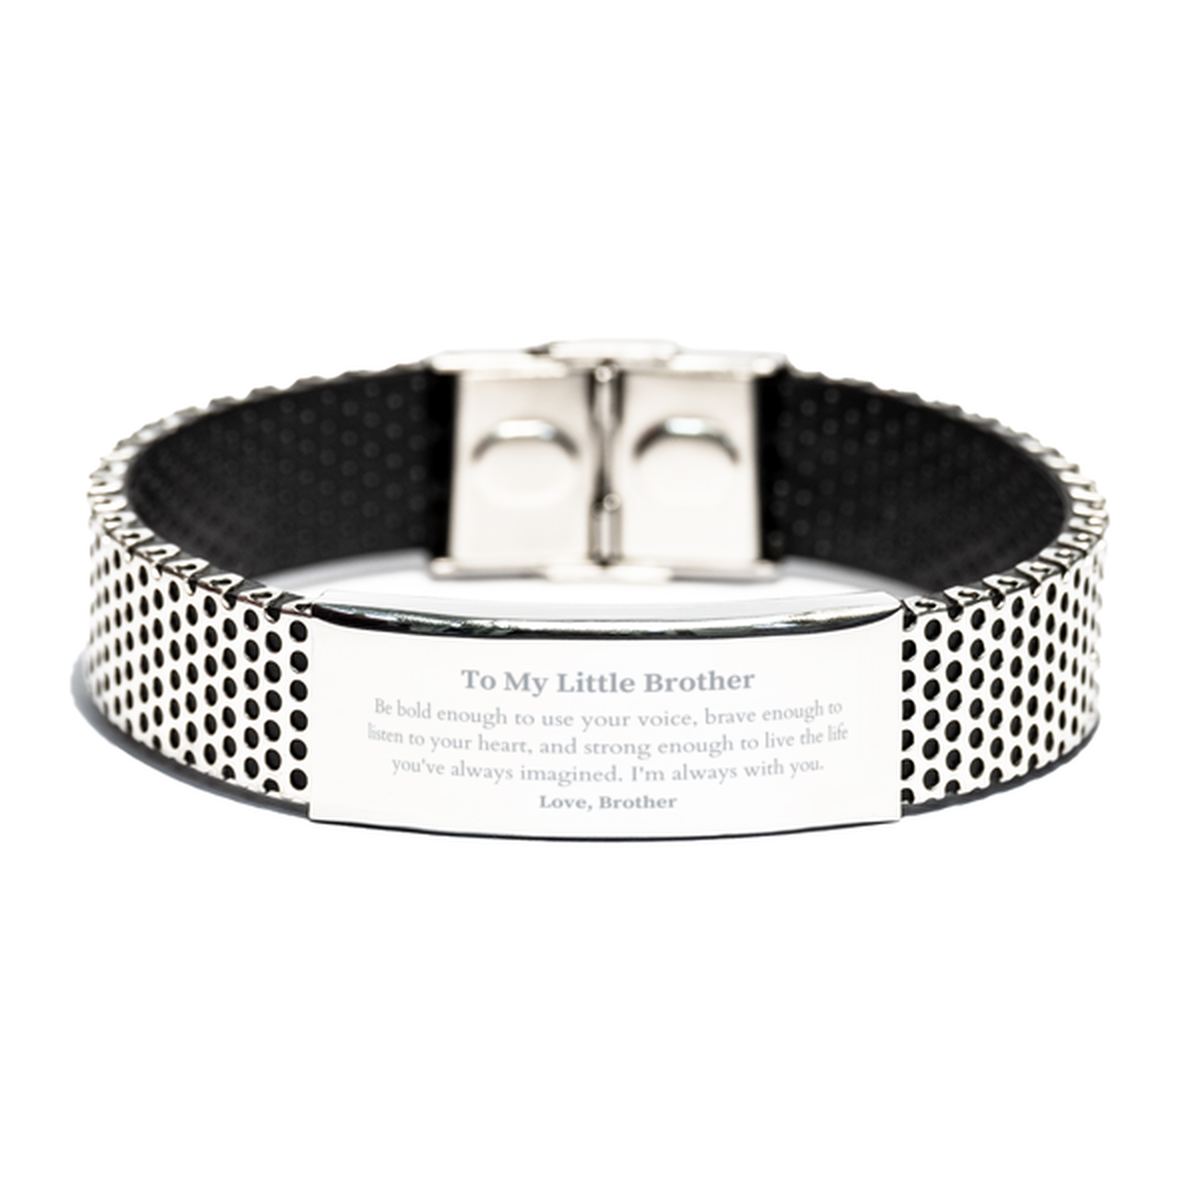 Keepsake Little Brother Stainless Steel Bracelet Gift Idea Graduation Christmas Birthday Little Brother from Brother, Little Brother Be bold enough to use your voice, brave enough to listen to your heart. Love, Brother